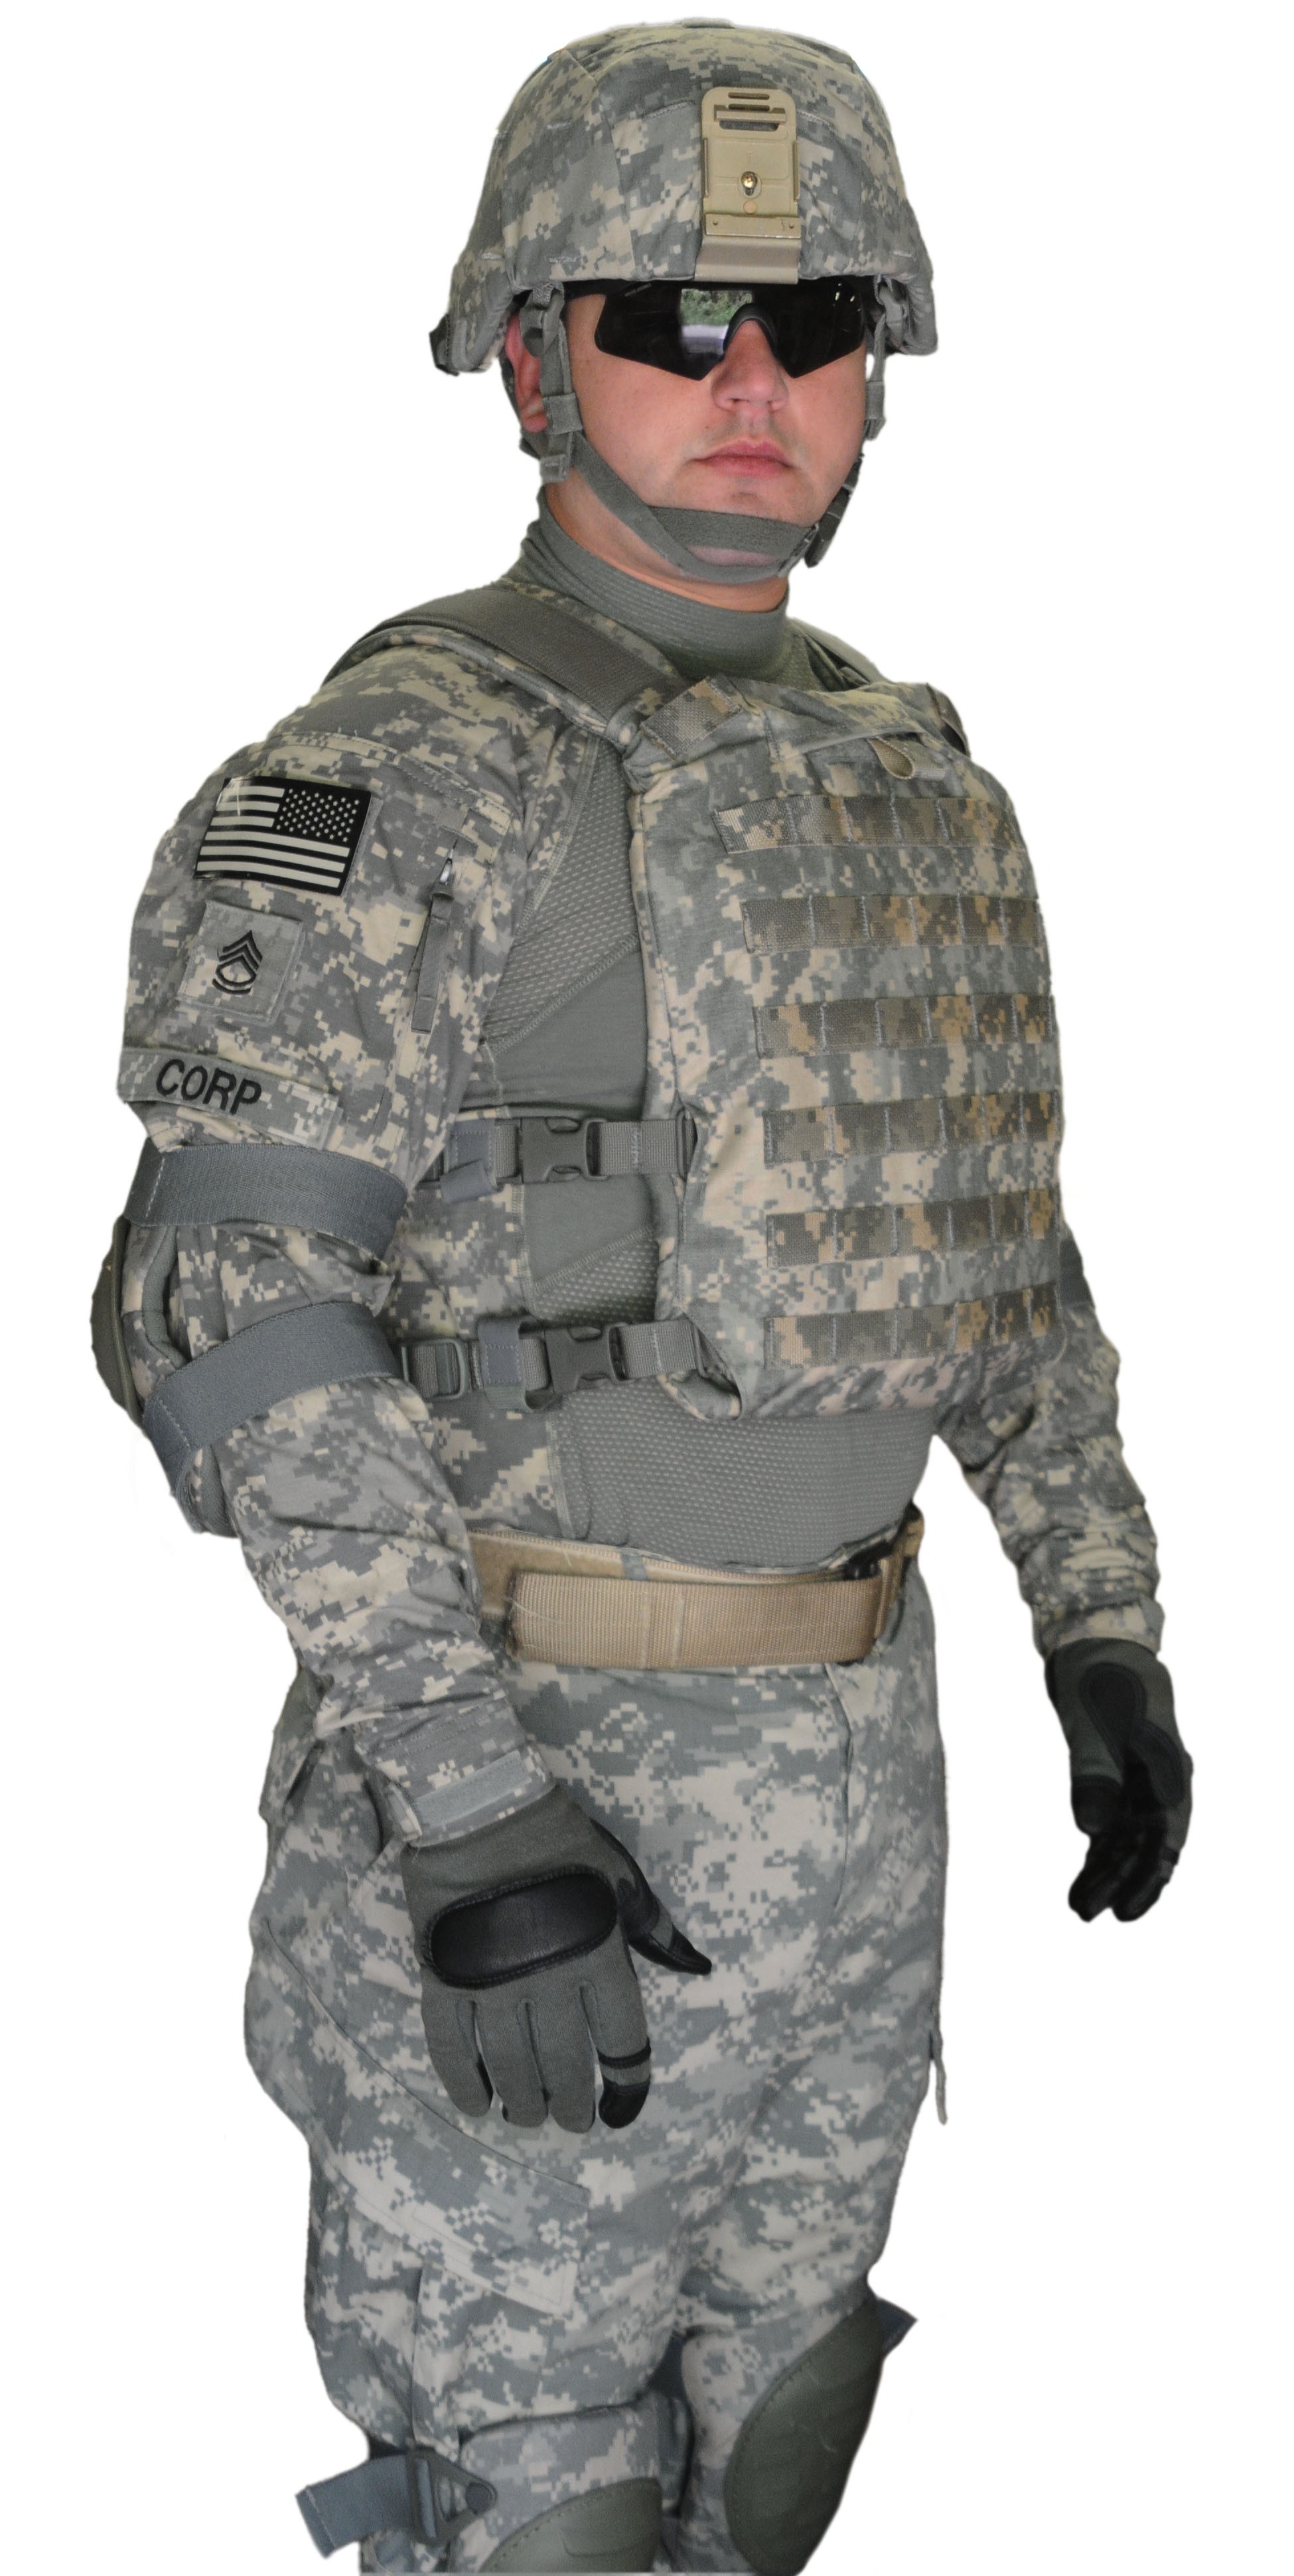 1/6th U.S Army Special Forces Camouflage Protective Bulletproof Vest Model 